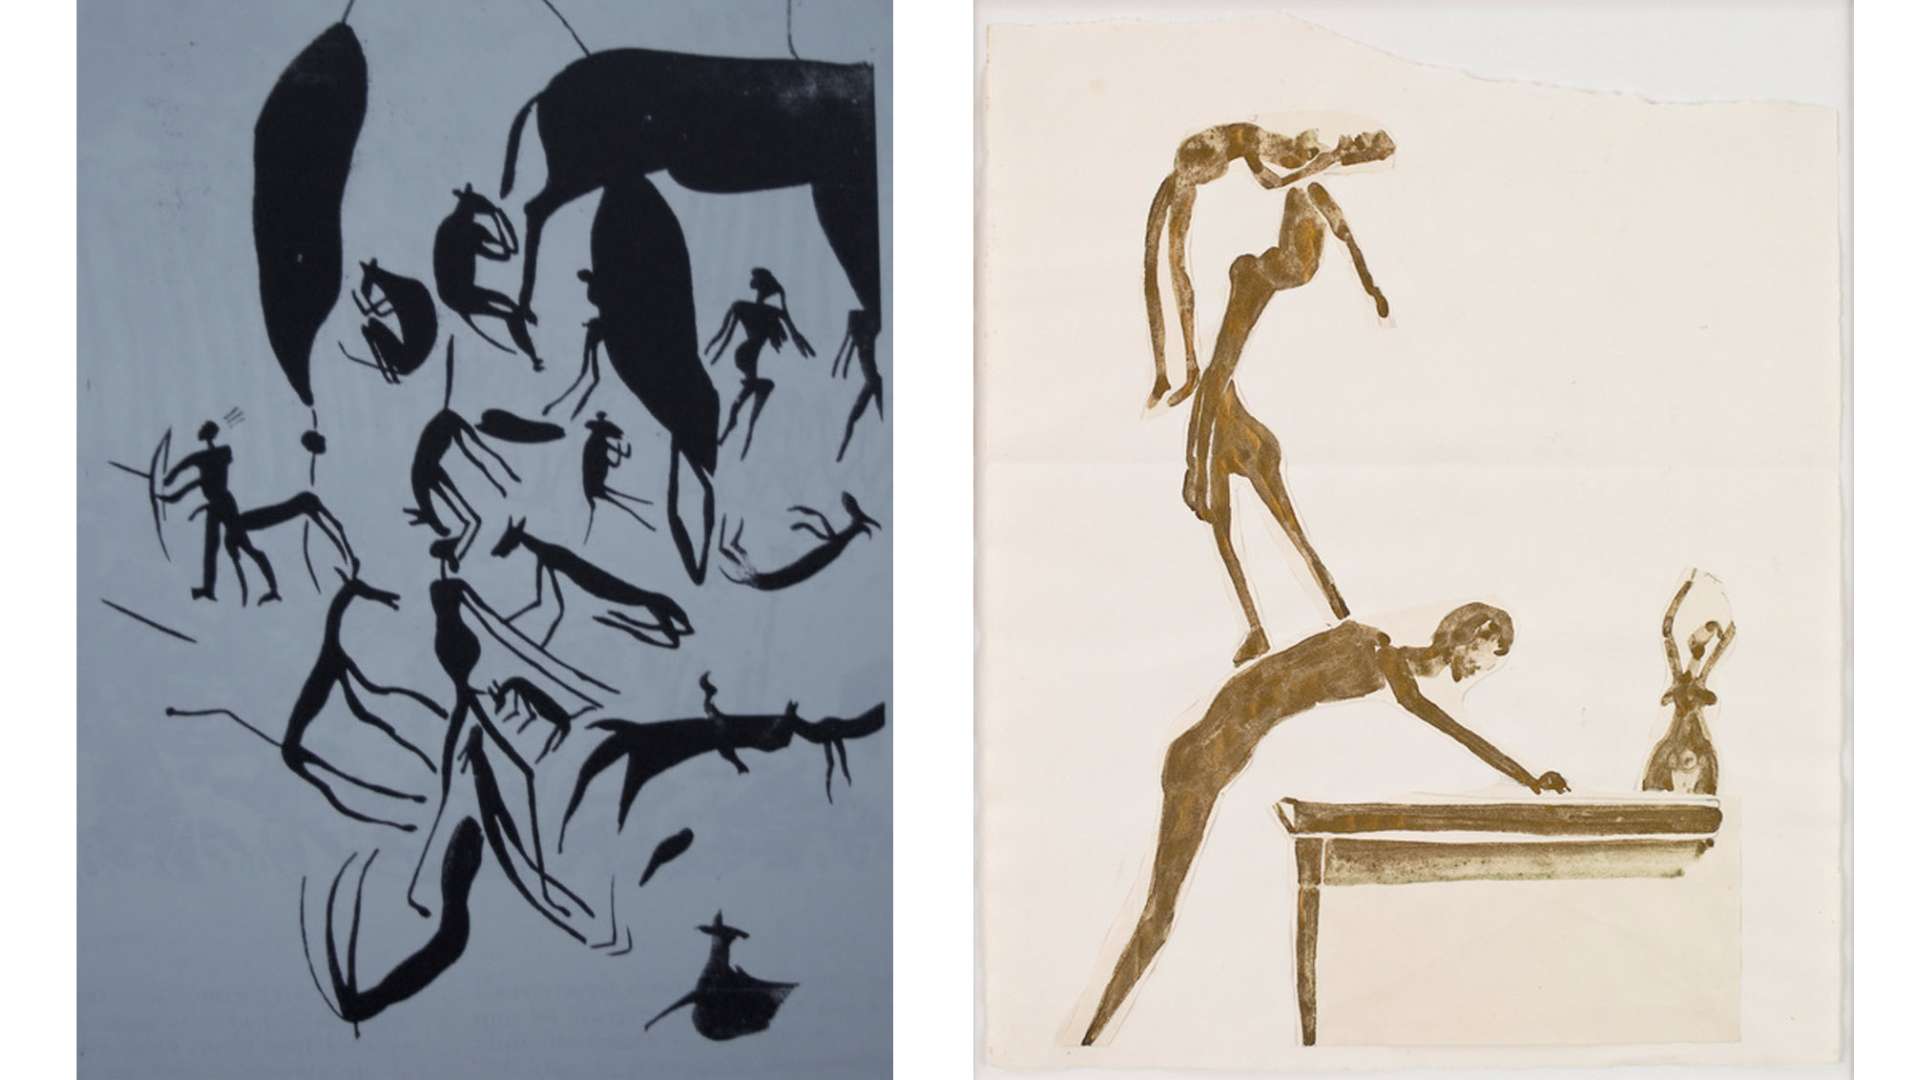 Leo Frobenius “MKOTO SHELTER” Southern Rhodesia, fragments “of men and animals sitting in a strange way” in “L’art africain” Cahiers d’art, Paris 1930. On the right, “CIRCUS ARTISTS” (acrobatics) by Joseoh Beuys, circa 1954, pencil and gold paint. (coll. Helga and Walter Laub).